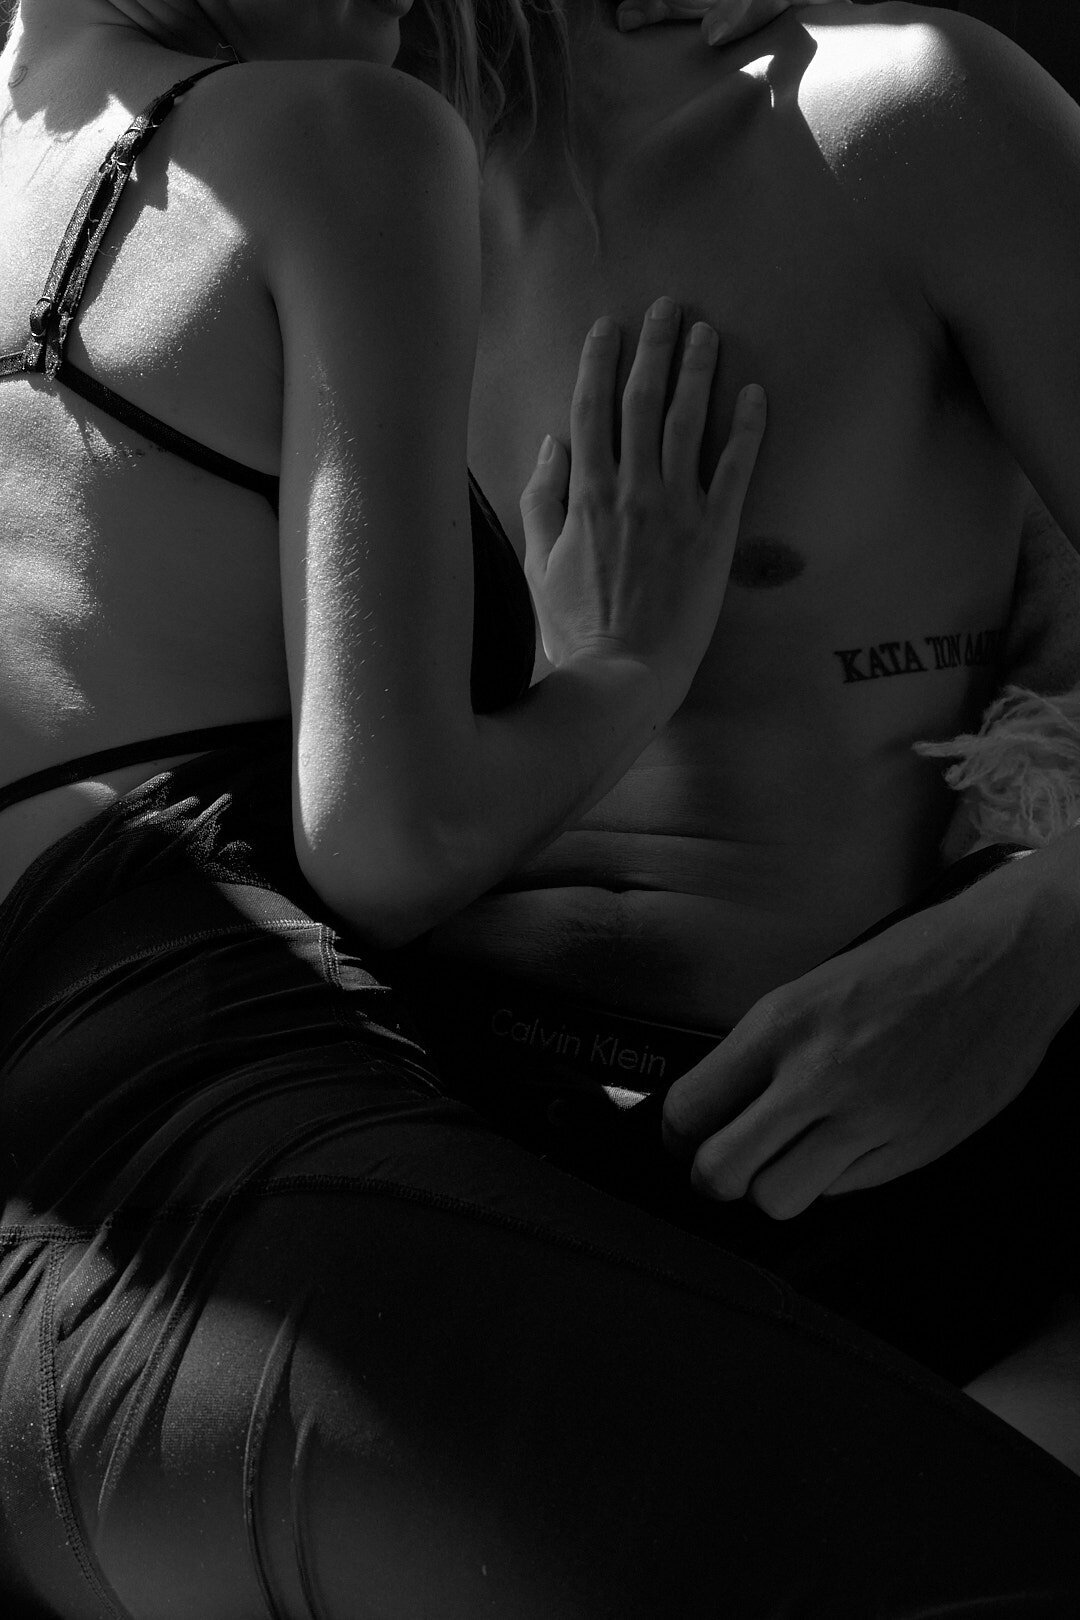 She is touching his bare chest intimately